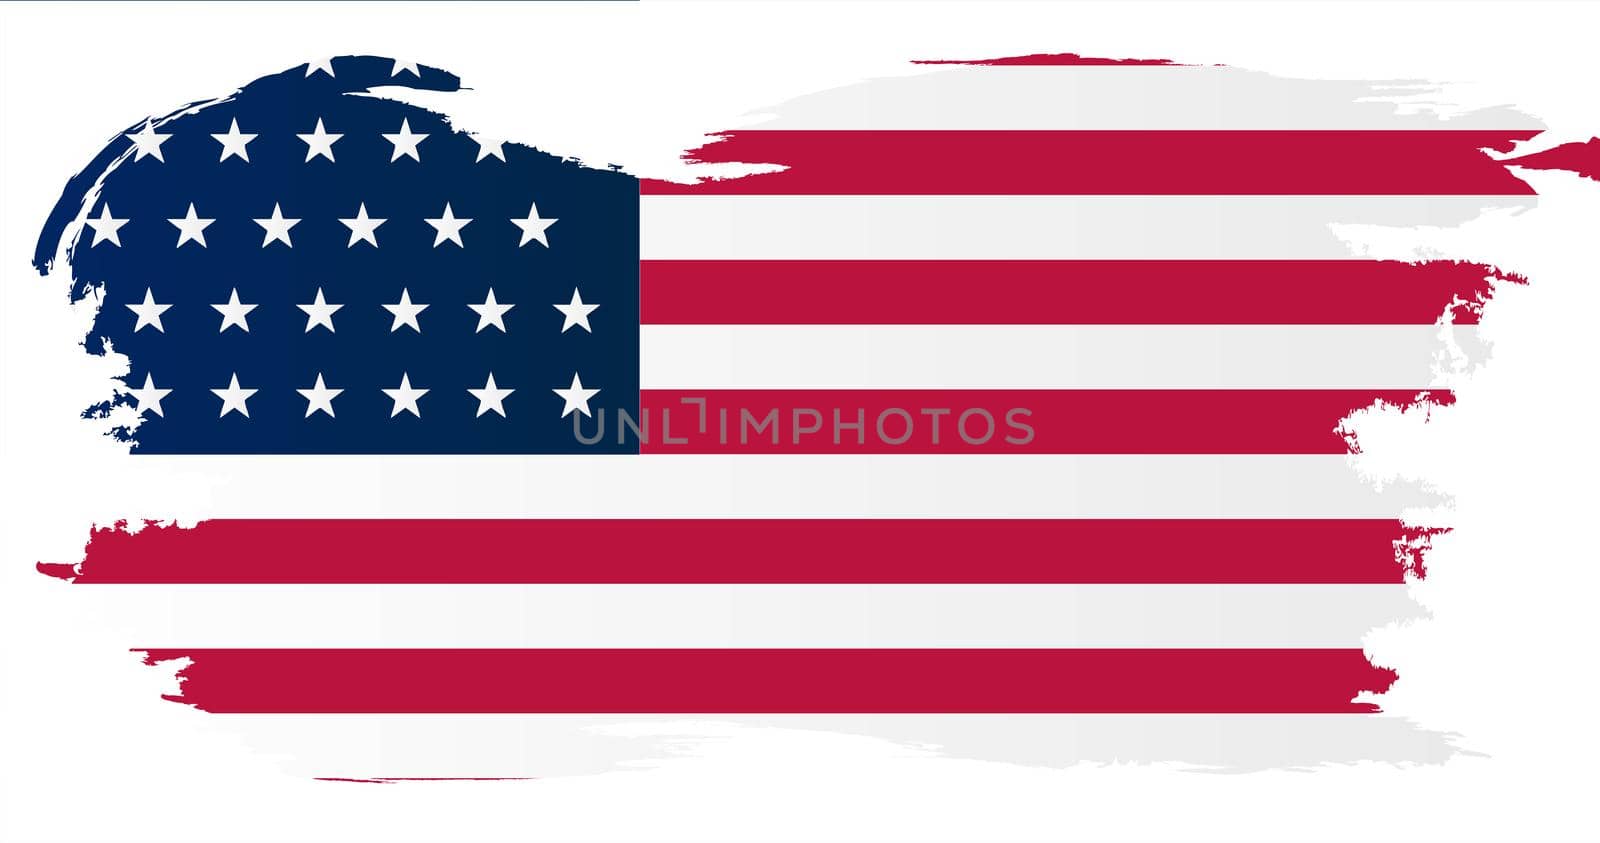 A Union side civil war stars and stripes flag set with a white grunge border